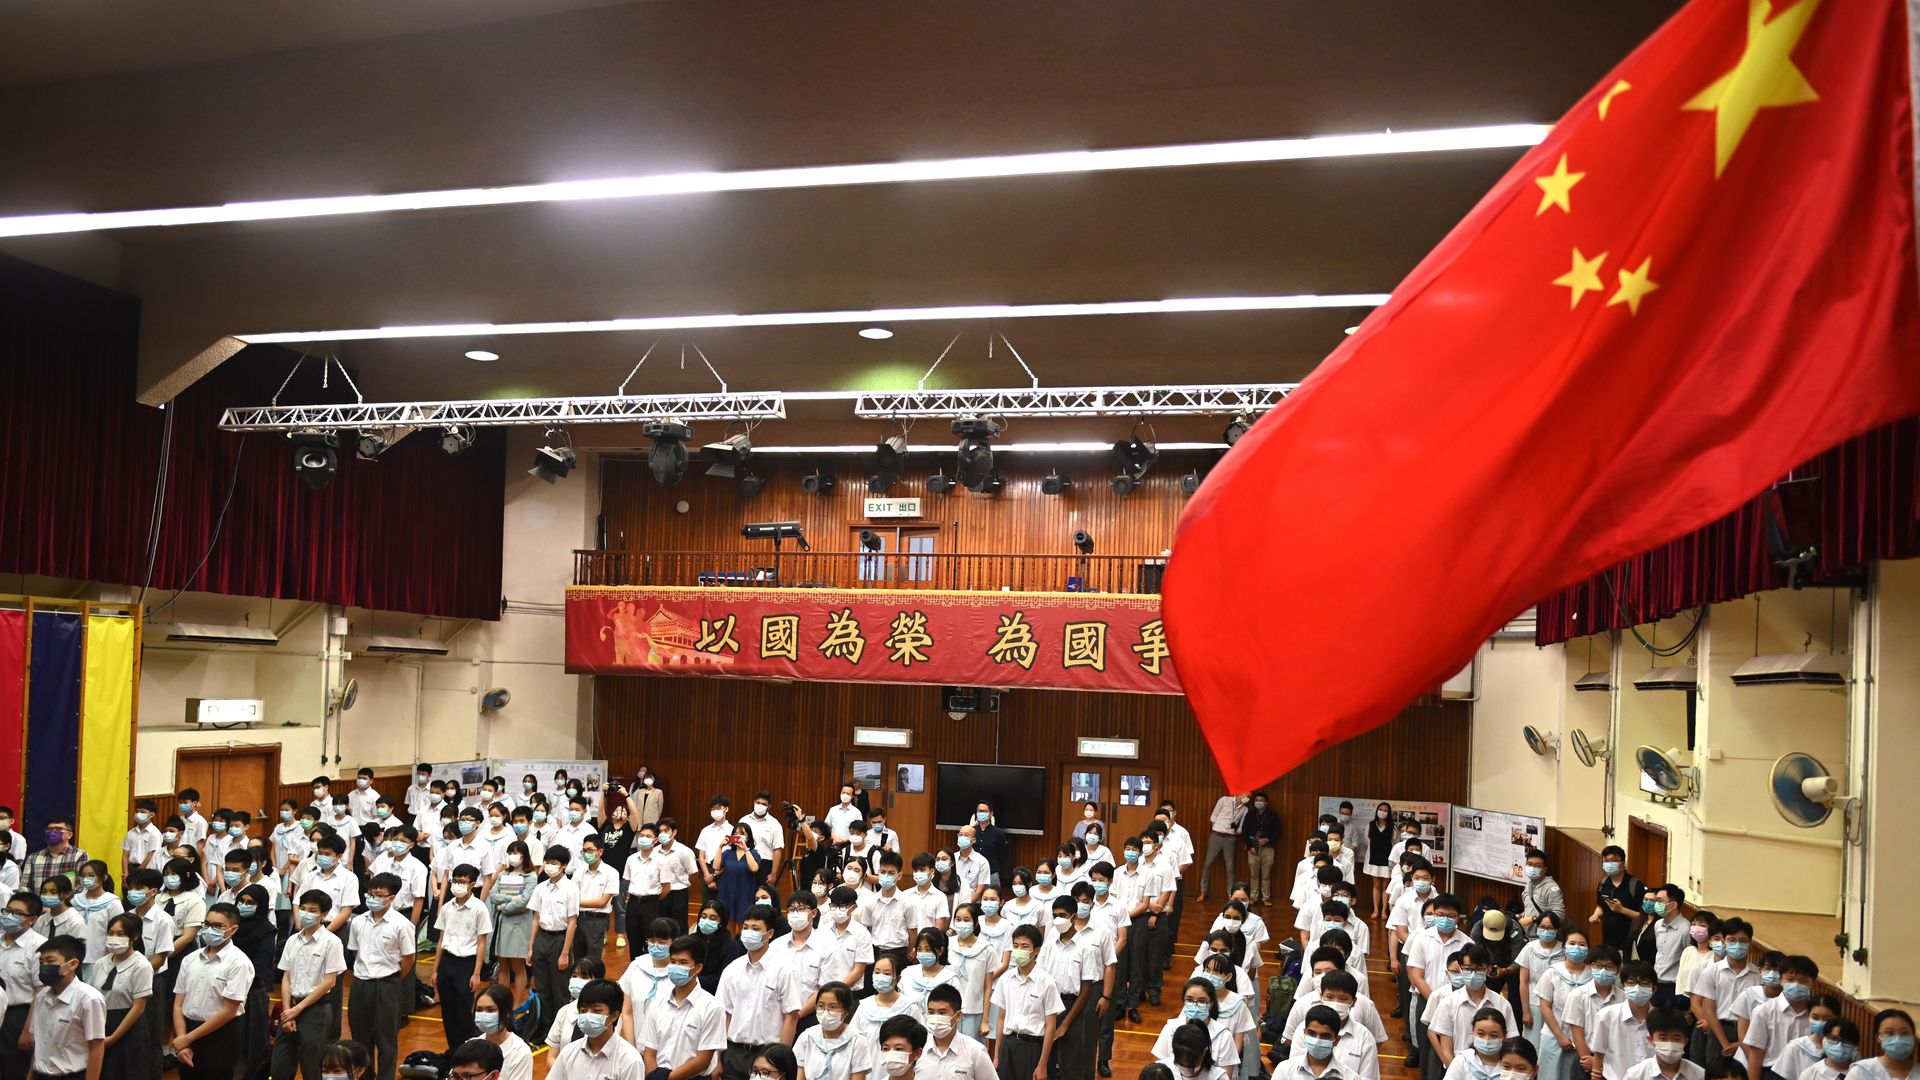 Students standing under China flag